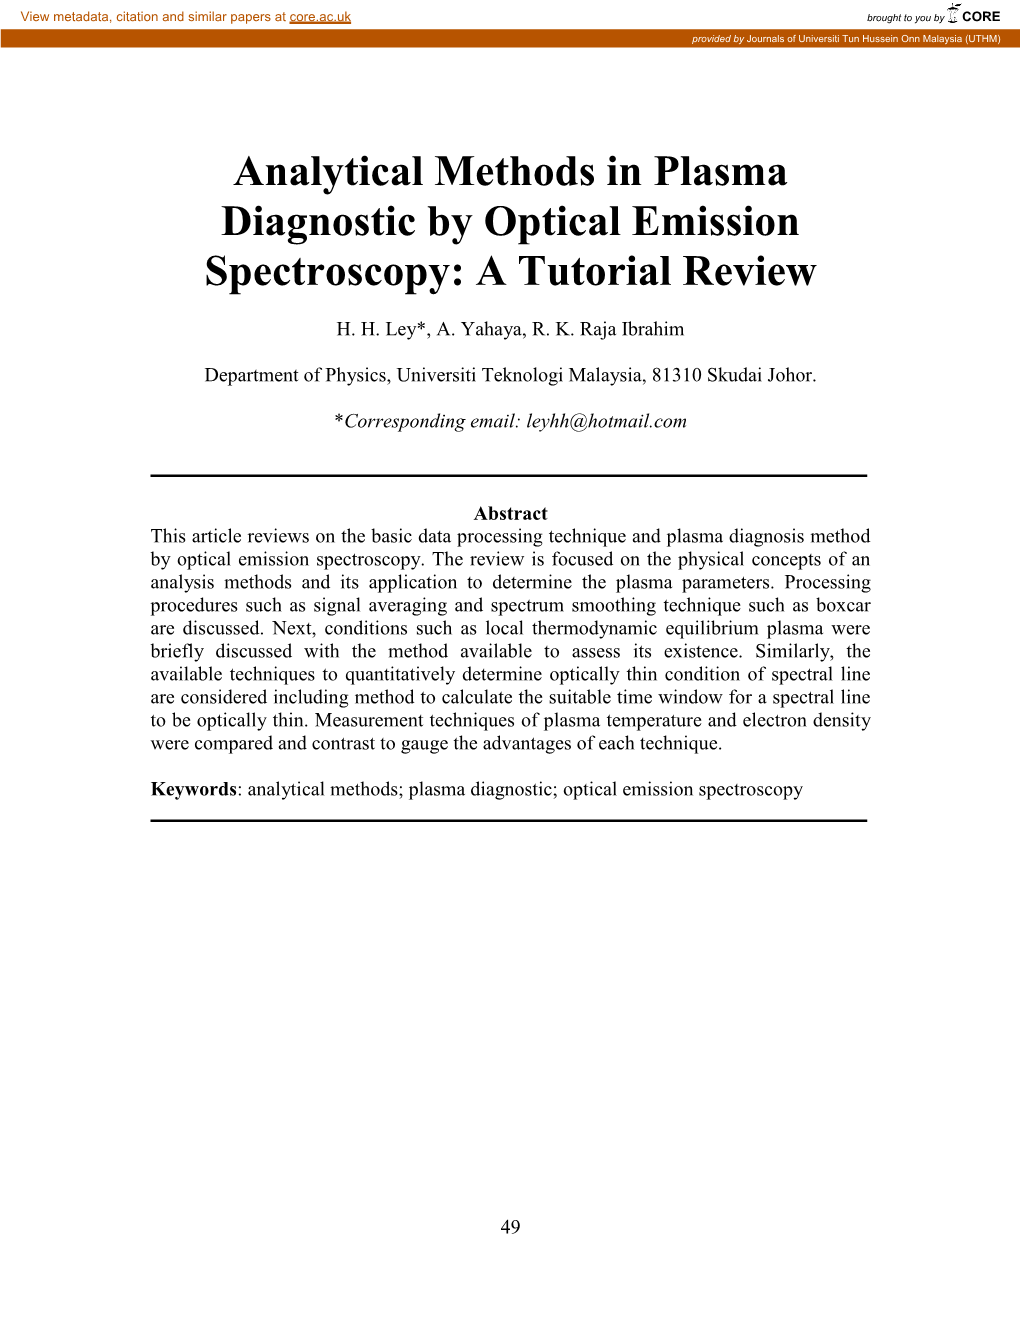 Analytical Methods in Plasma Diagnostic by Optical Emission Spectroscopy: a Tutorial Review